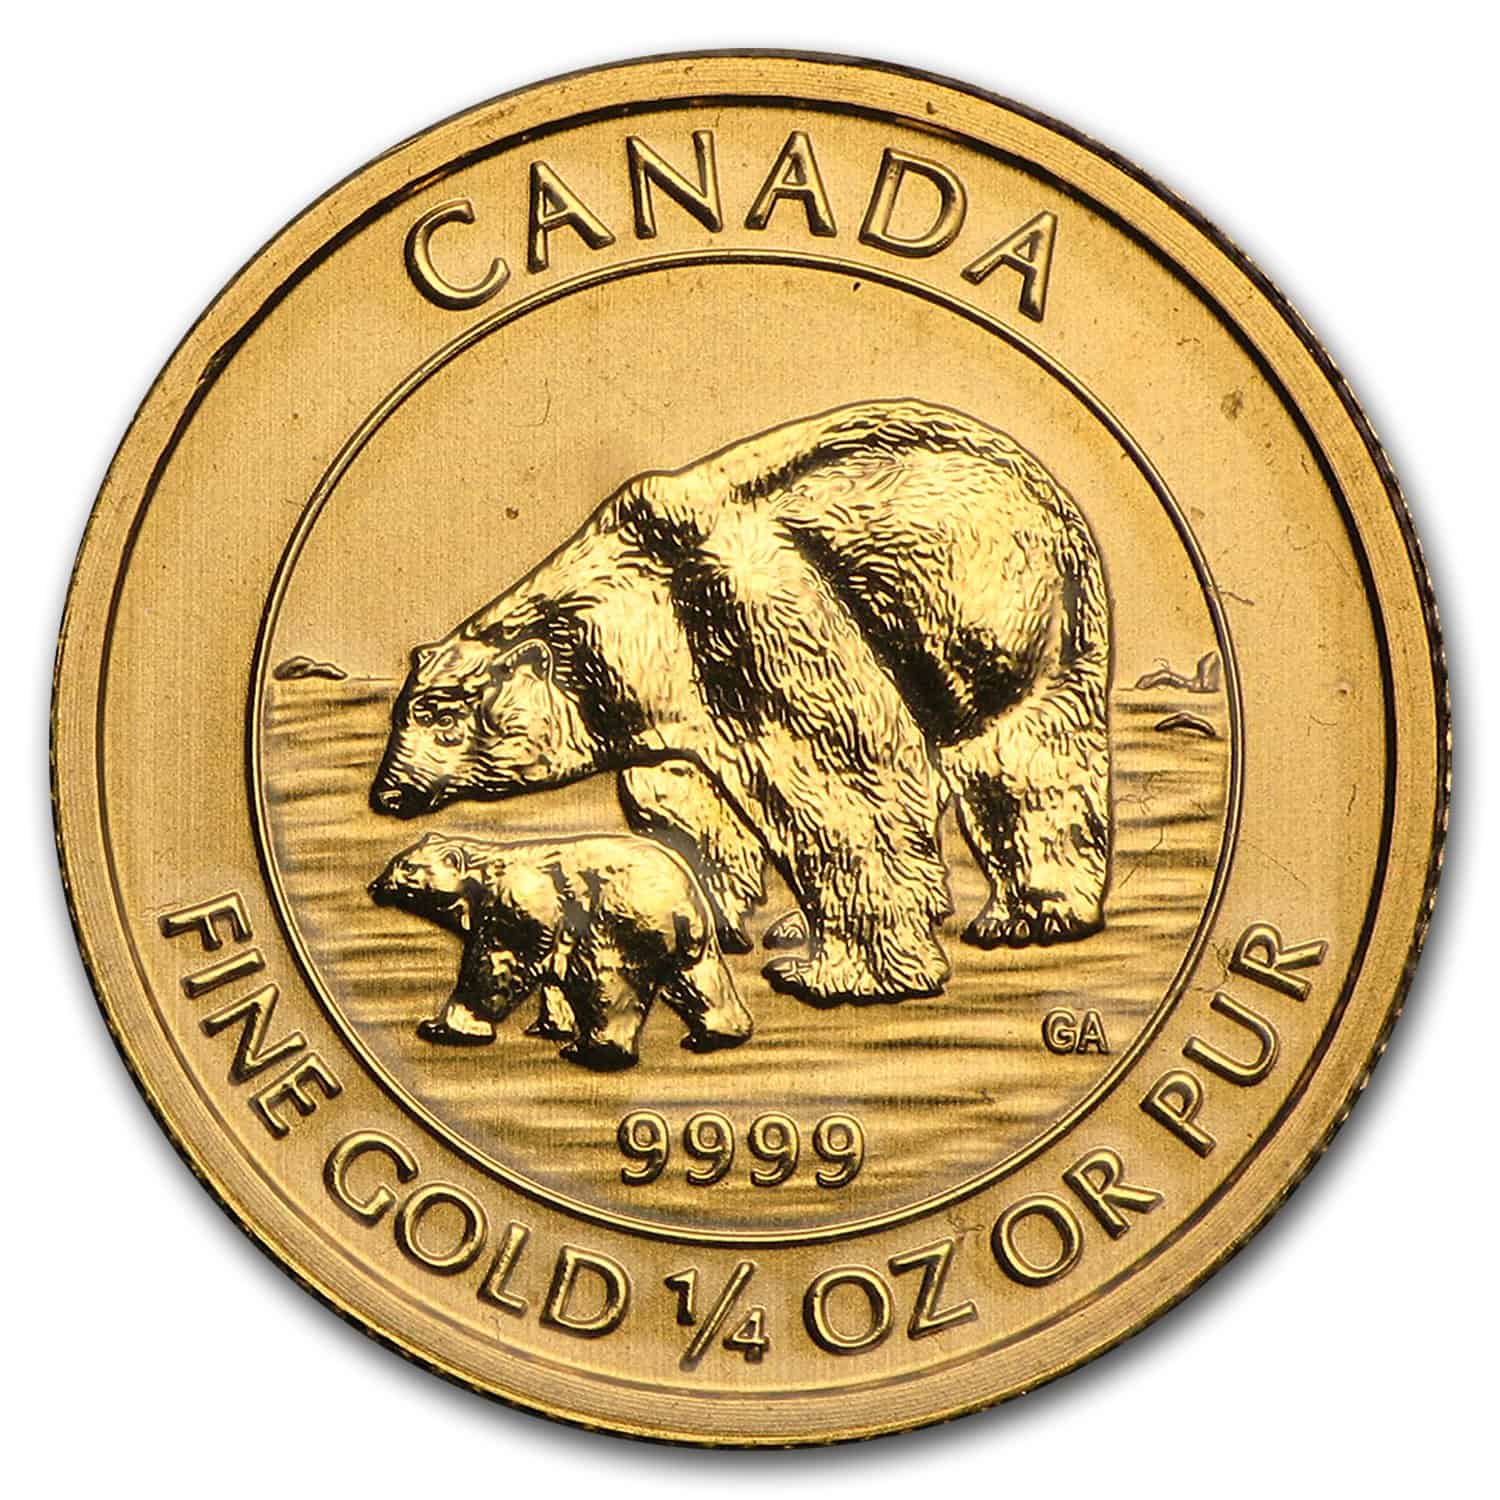 The Royal Canadian Mint produces the polar bear and cub gold coin, which is popular among gold coin collectors.